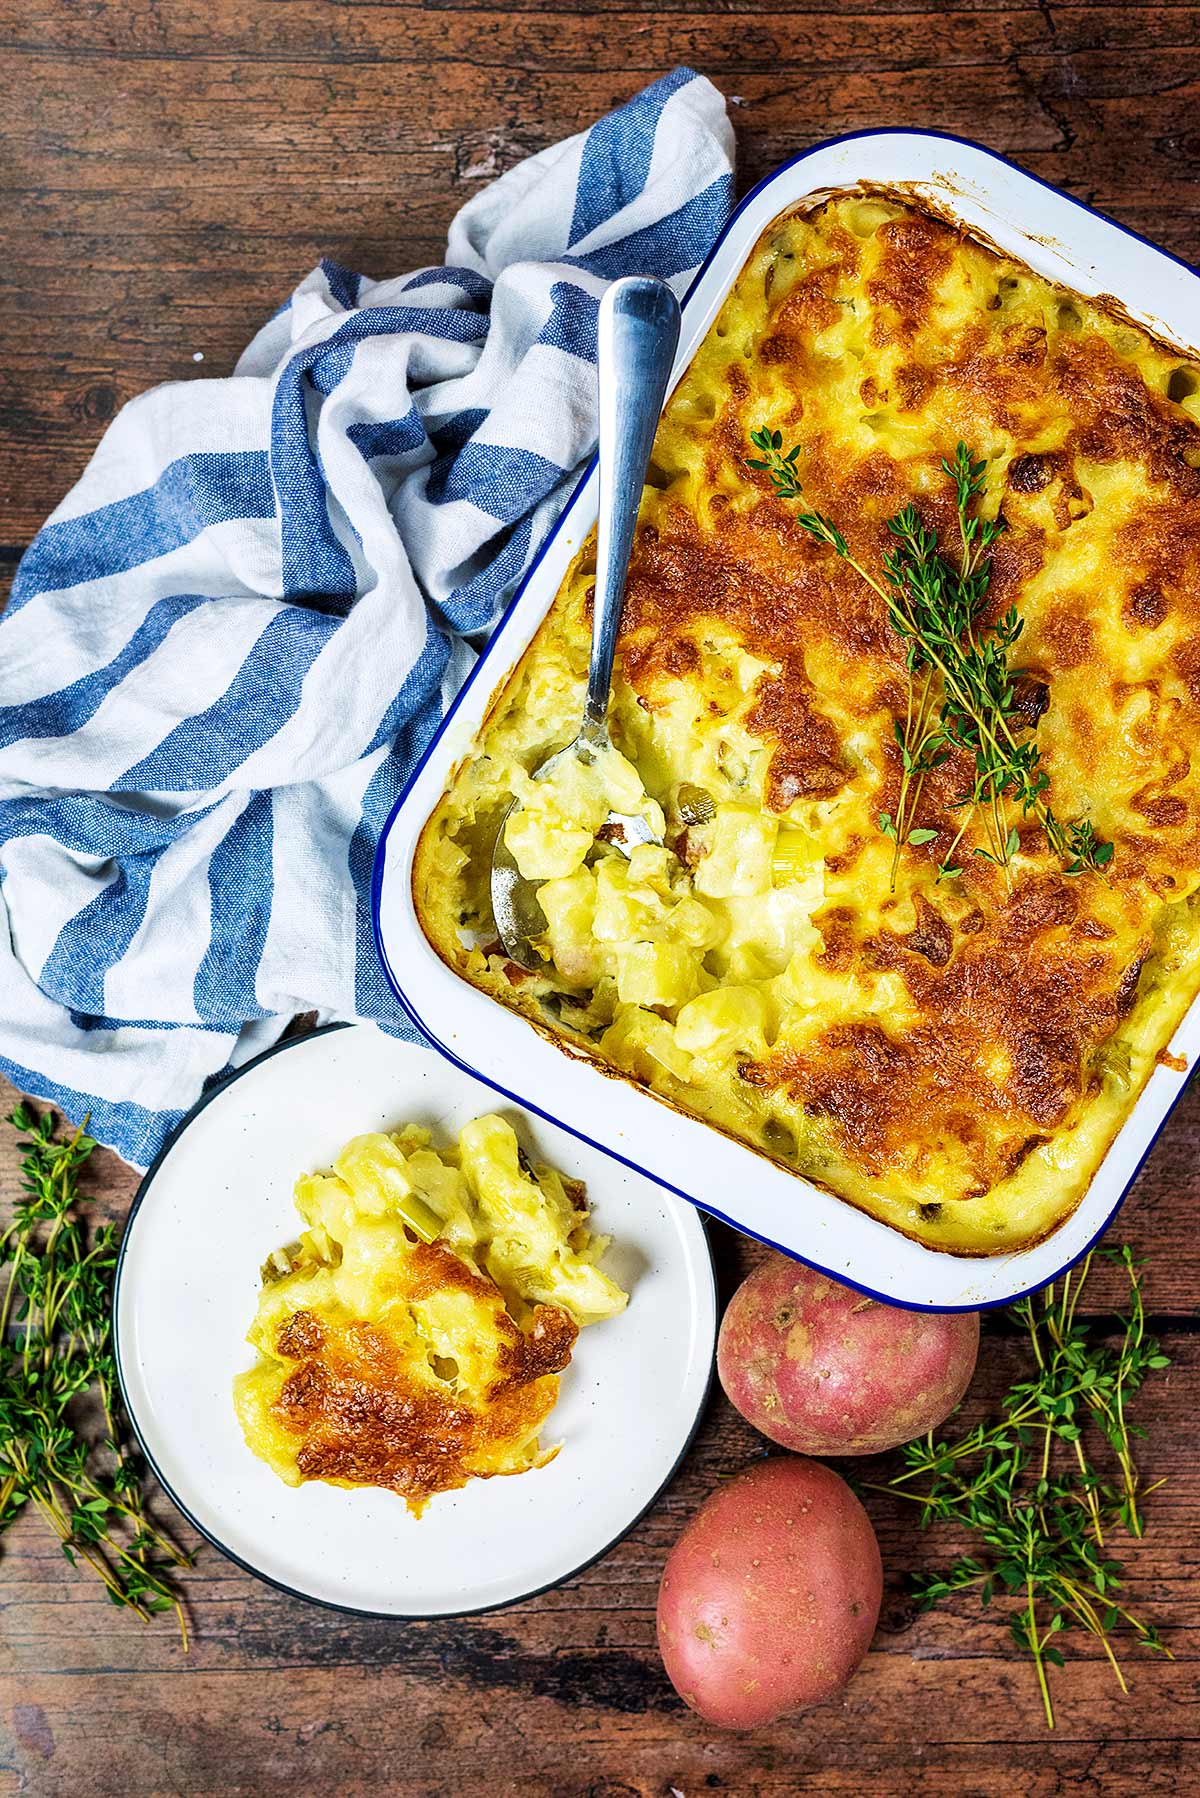 A baking dish full of potato bake next to a plate of more bake.